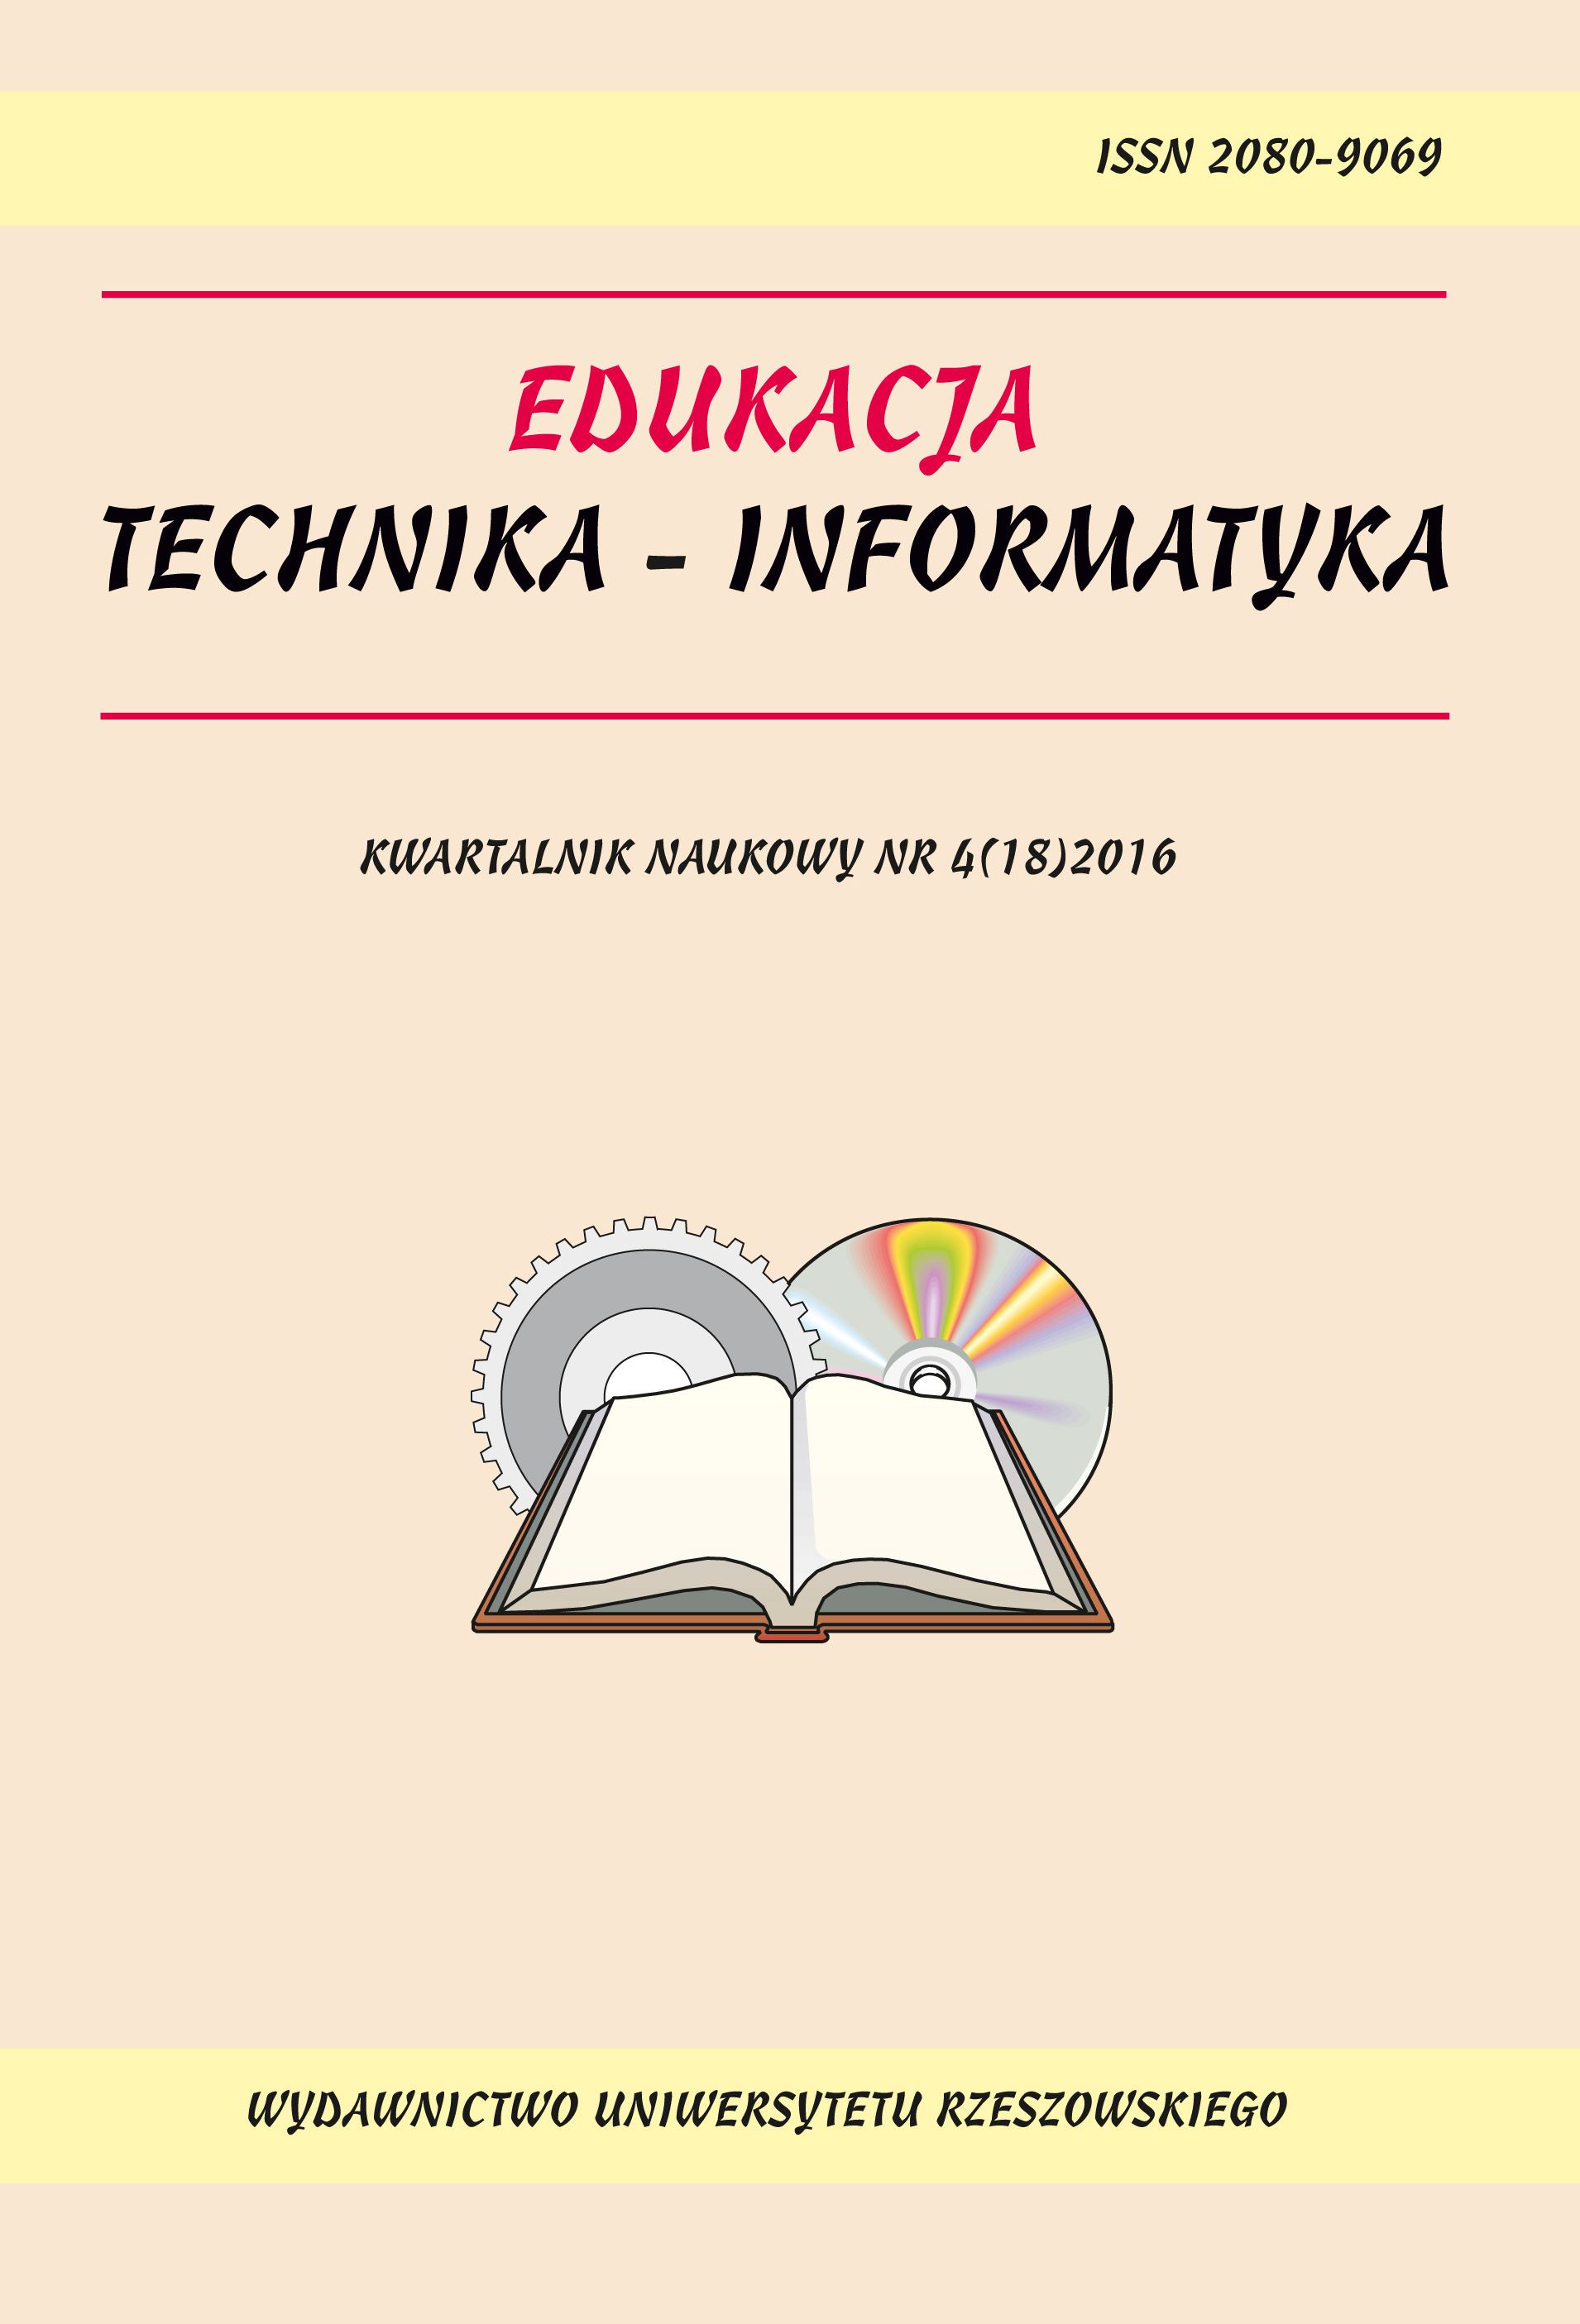 Proposition of validation of EduMATRIX as the educational
tool for supporting the teaching process of mathematics
in early education classes Cover Image